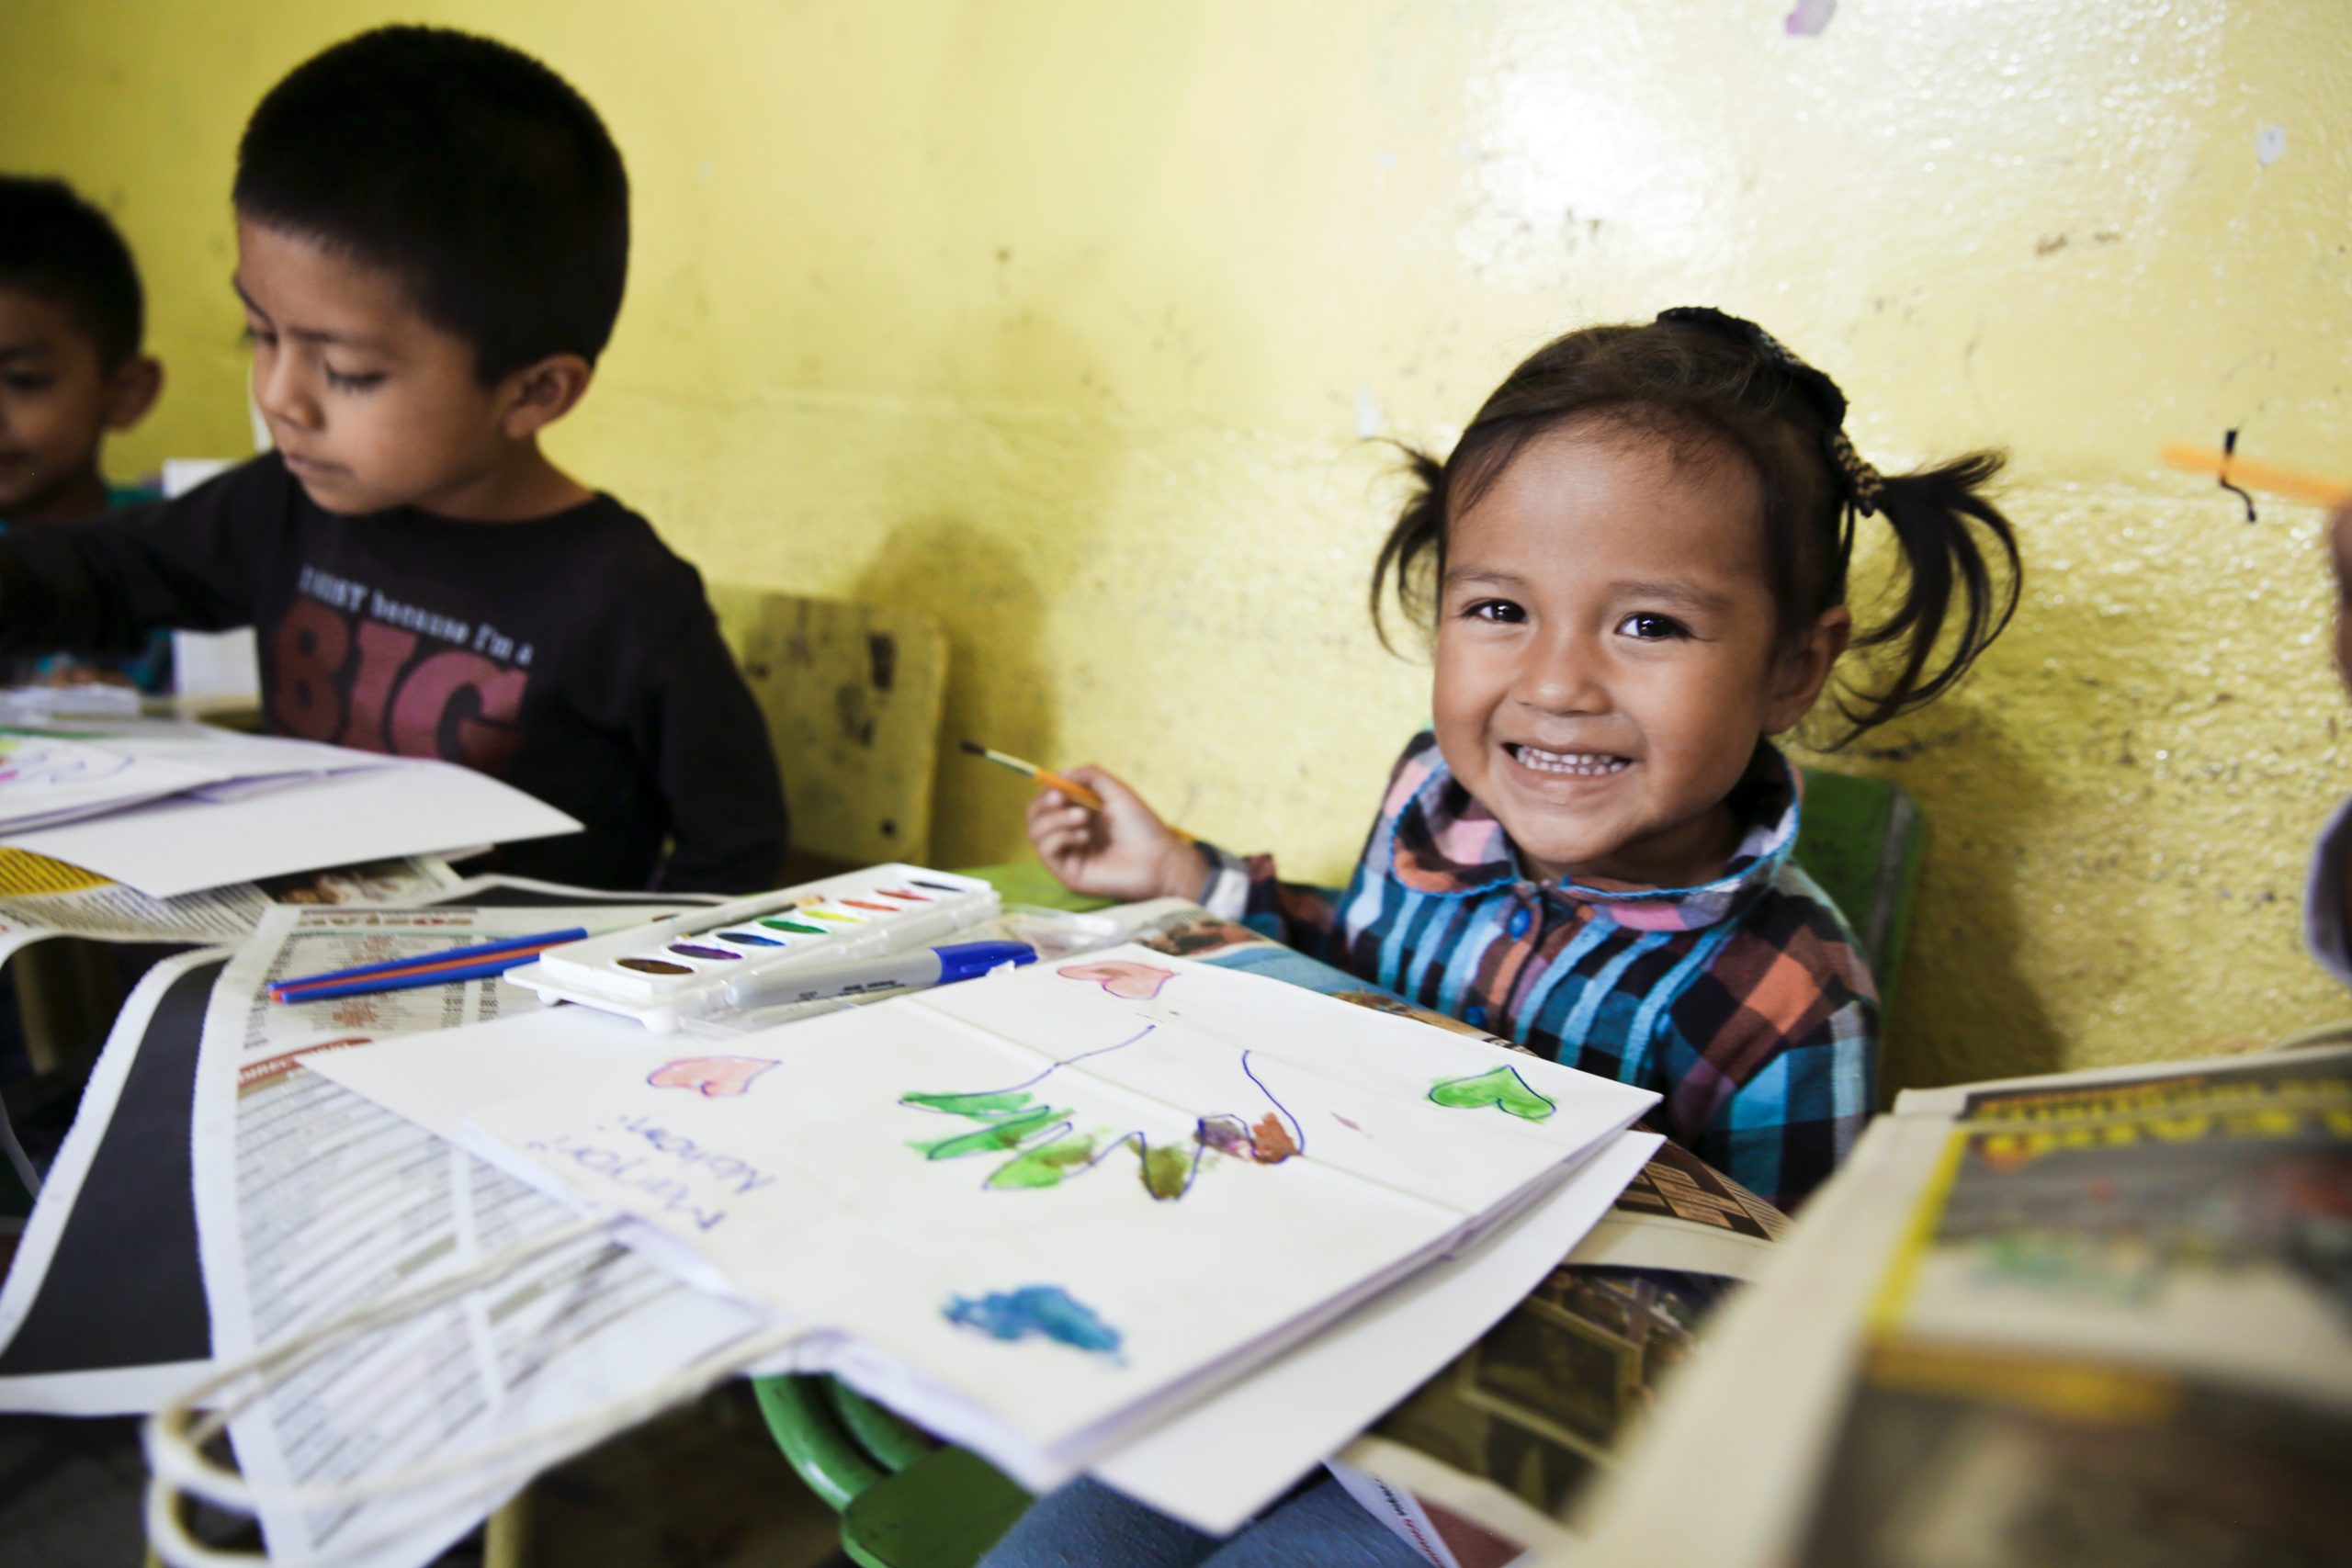 A boy of about four and a girl of about three painting with watercolors and smiling at a head start program